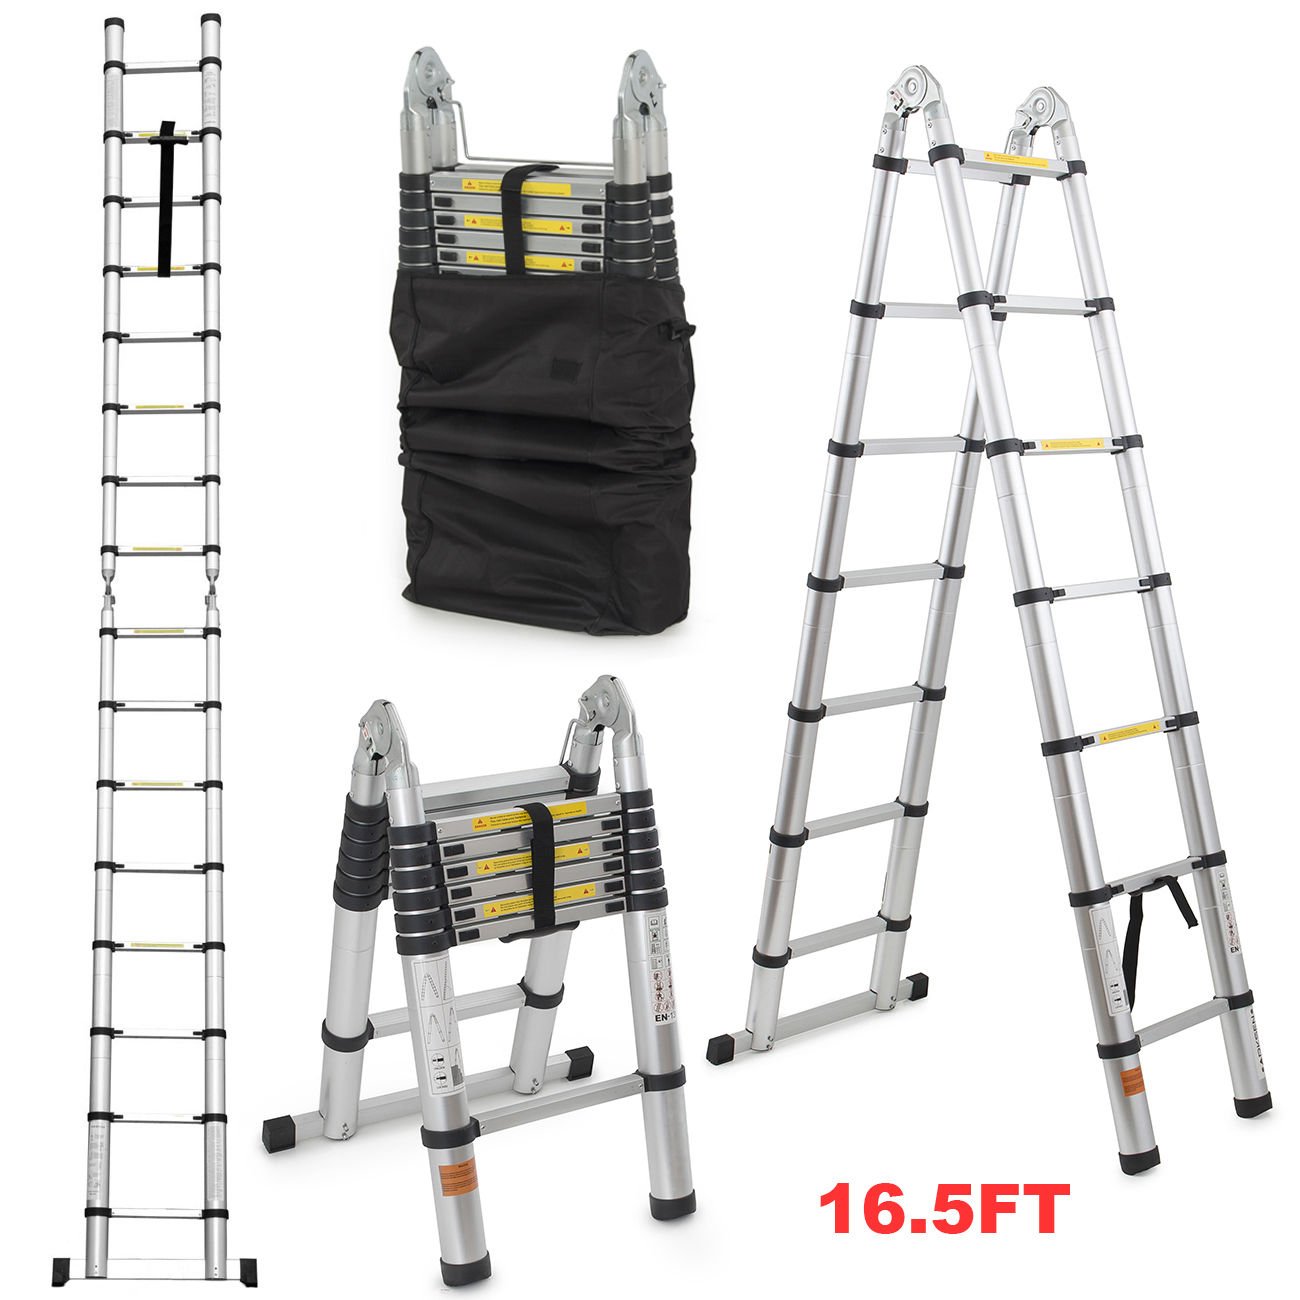 Globe House Products GHP 40.5Lbs 16.5Ft Aluminum A-Type 330Lbs Capacity Telescopic Ladder with Bag